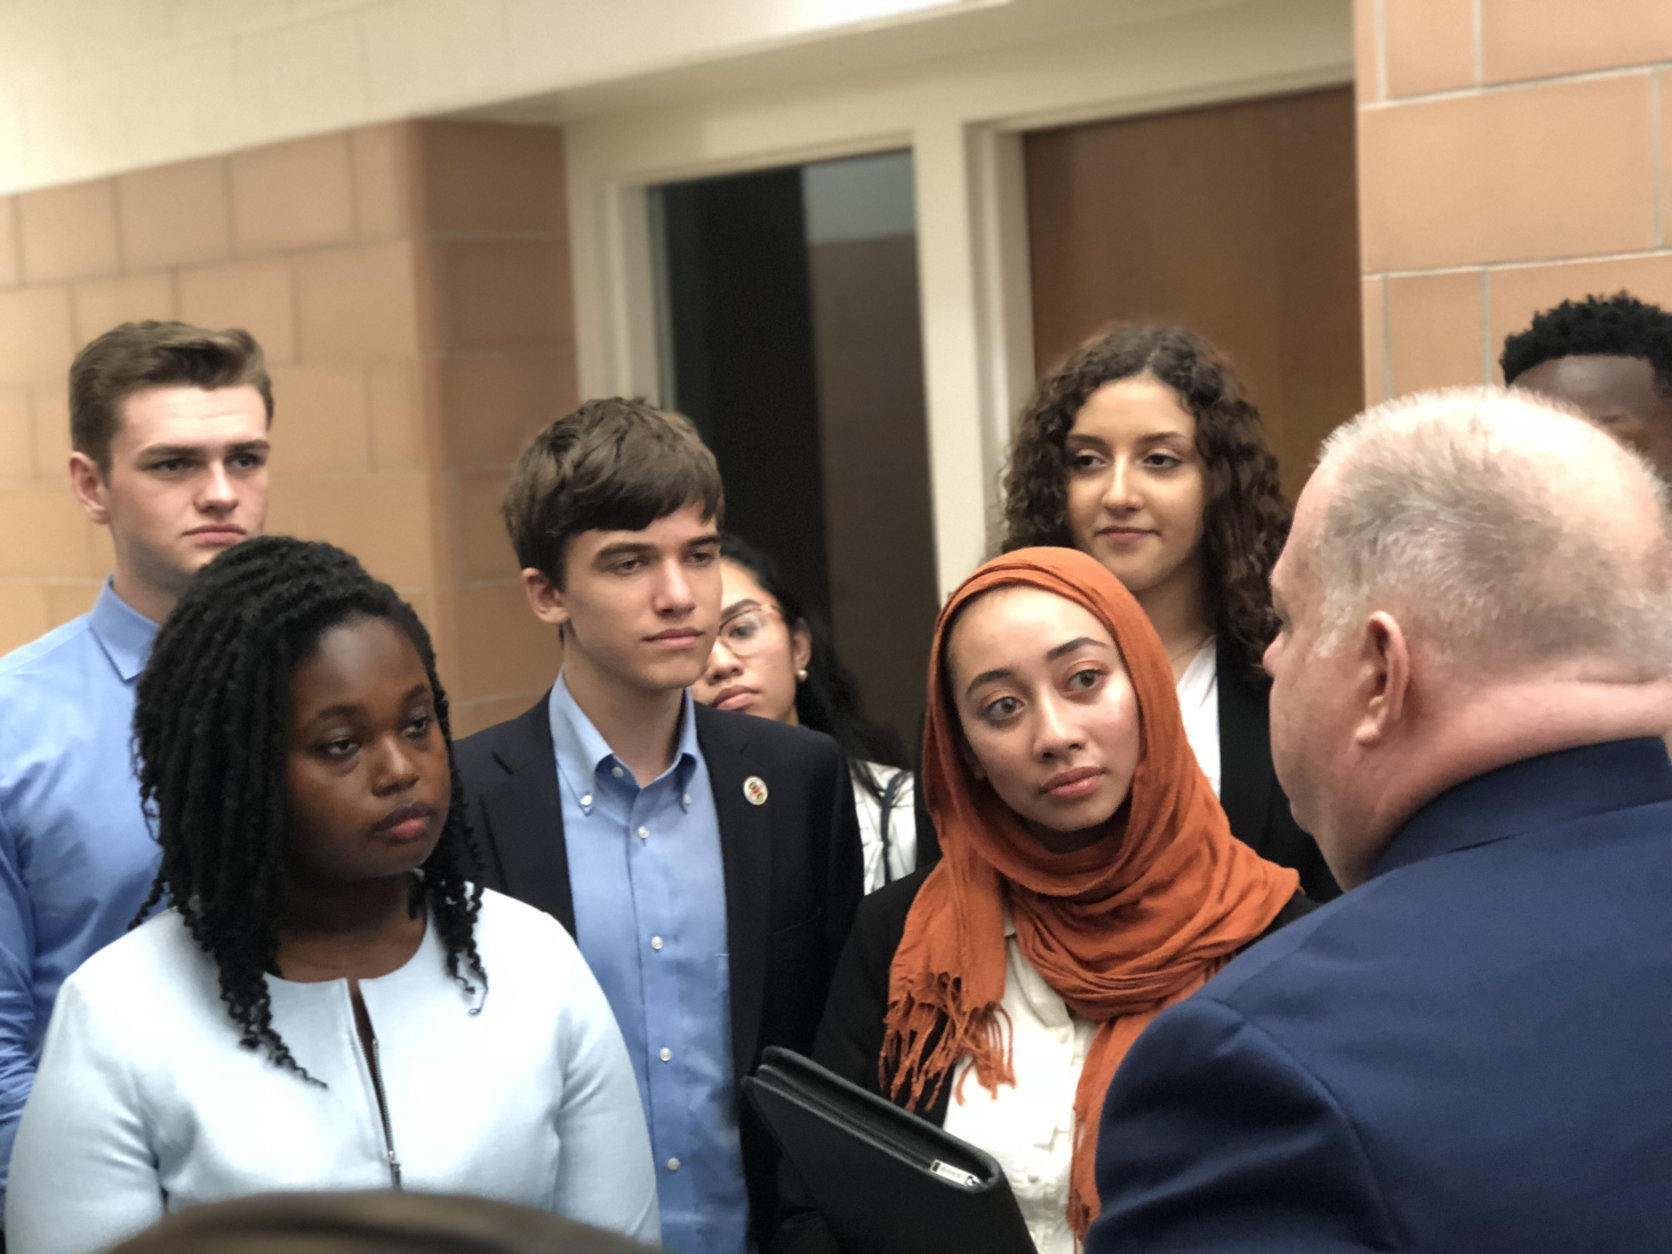 Maryland Gov. Larry Hogan spoke to students about the new school safety tip line. They got a tour of the Maryland Emergency Management Agency facility in Reisterstown, Maryland, on Wednesday, Oct. 3, 2018. (WTOP/Kate Ryan)